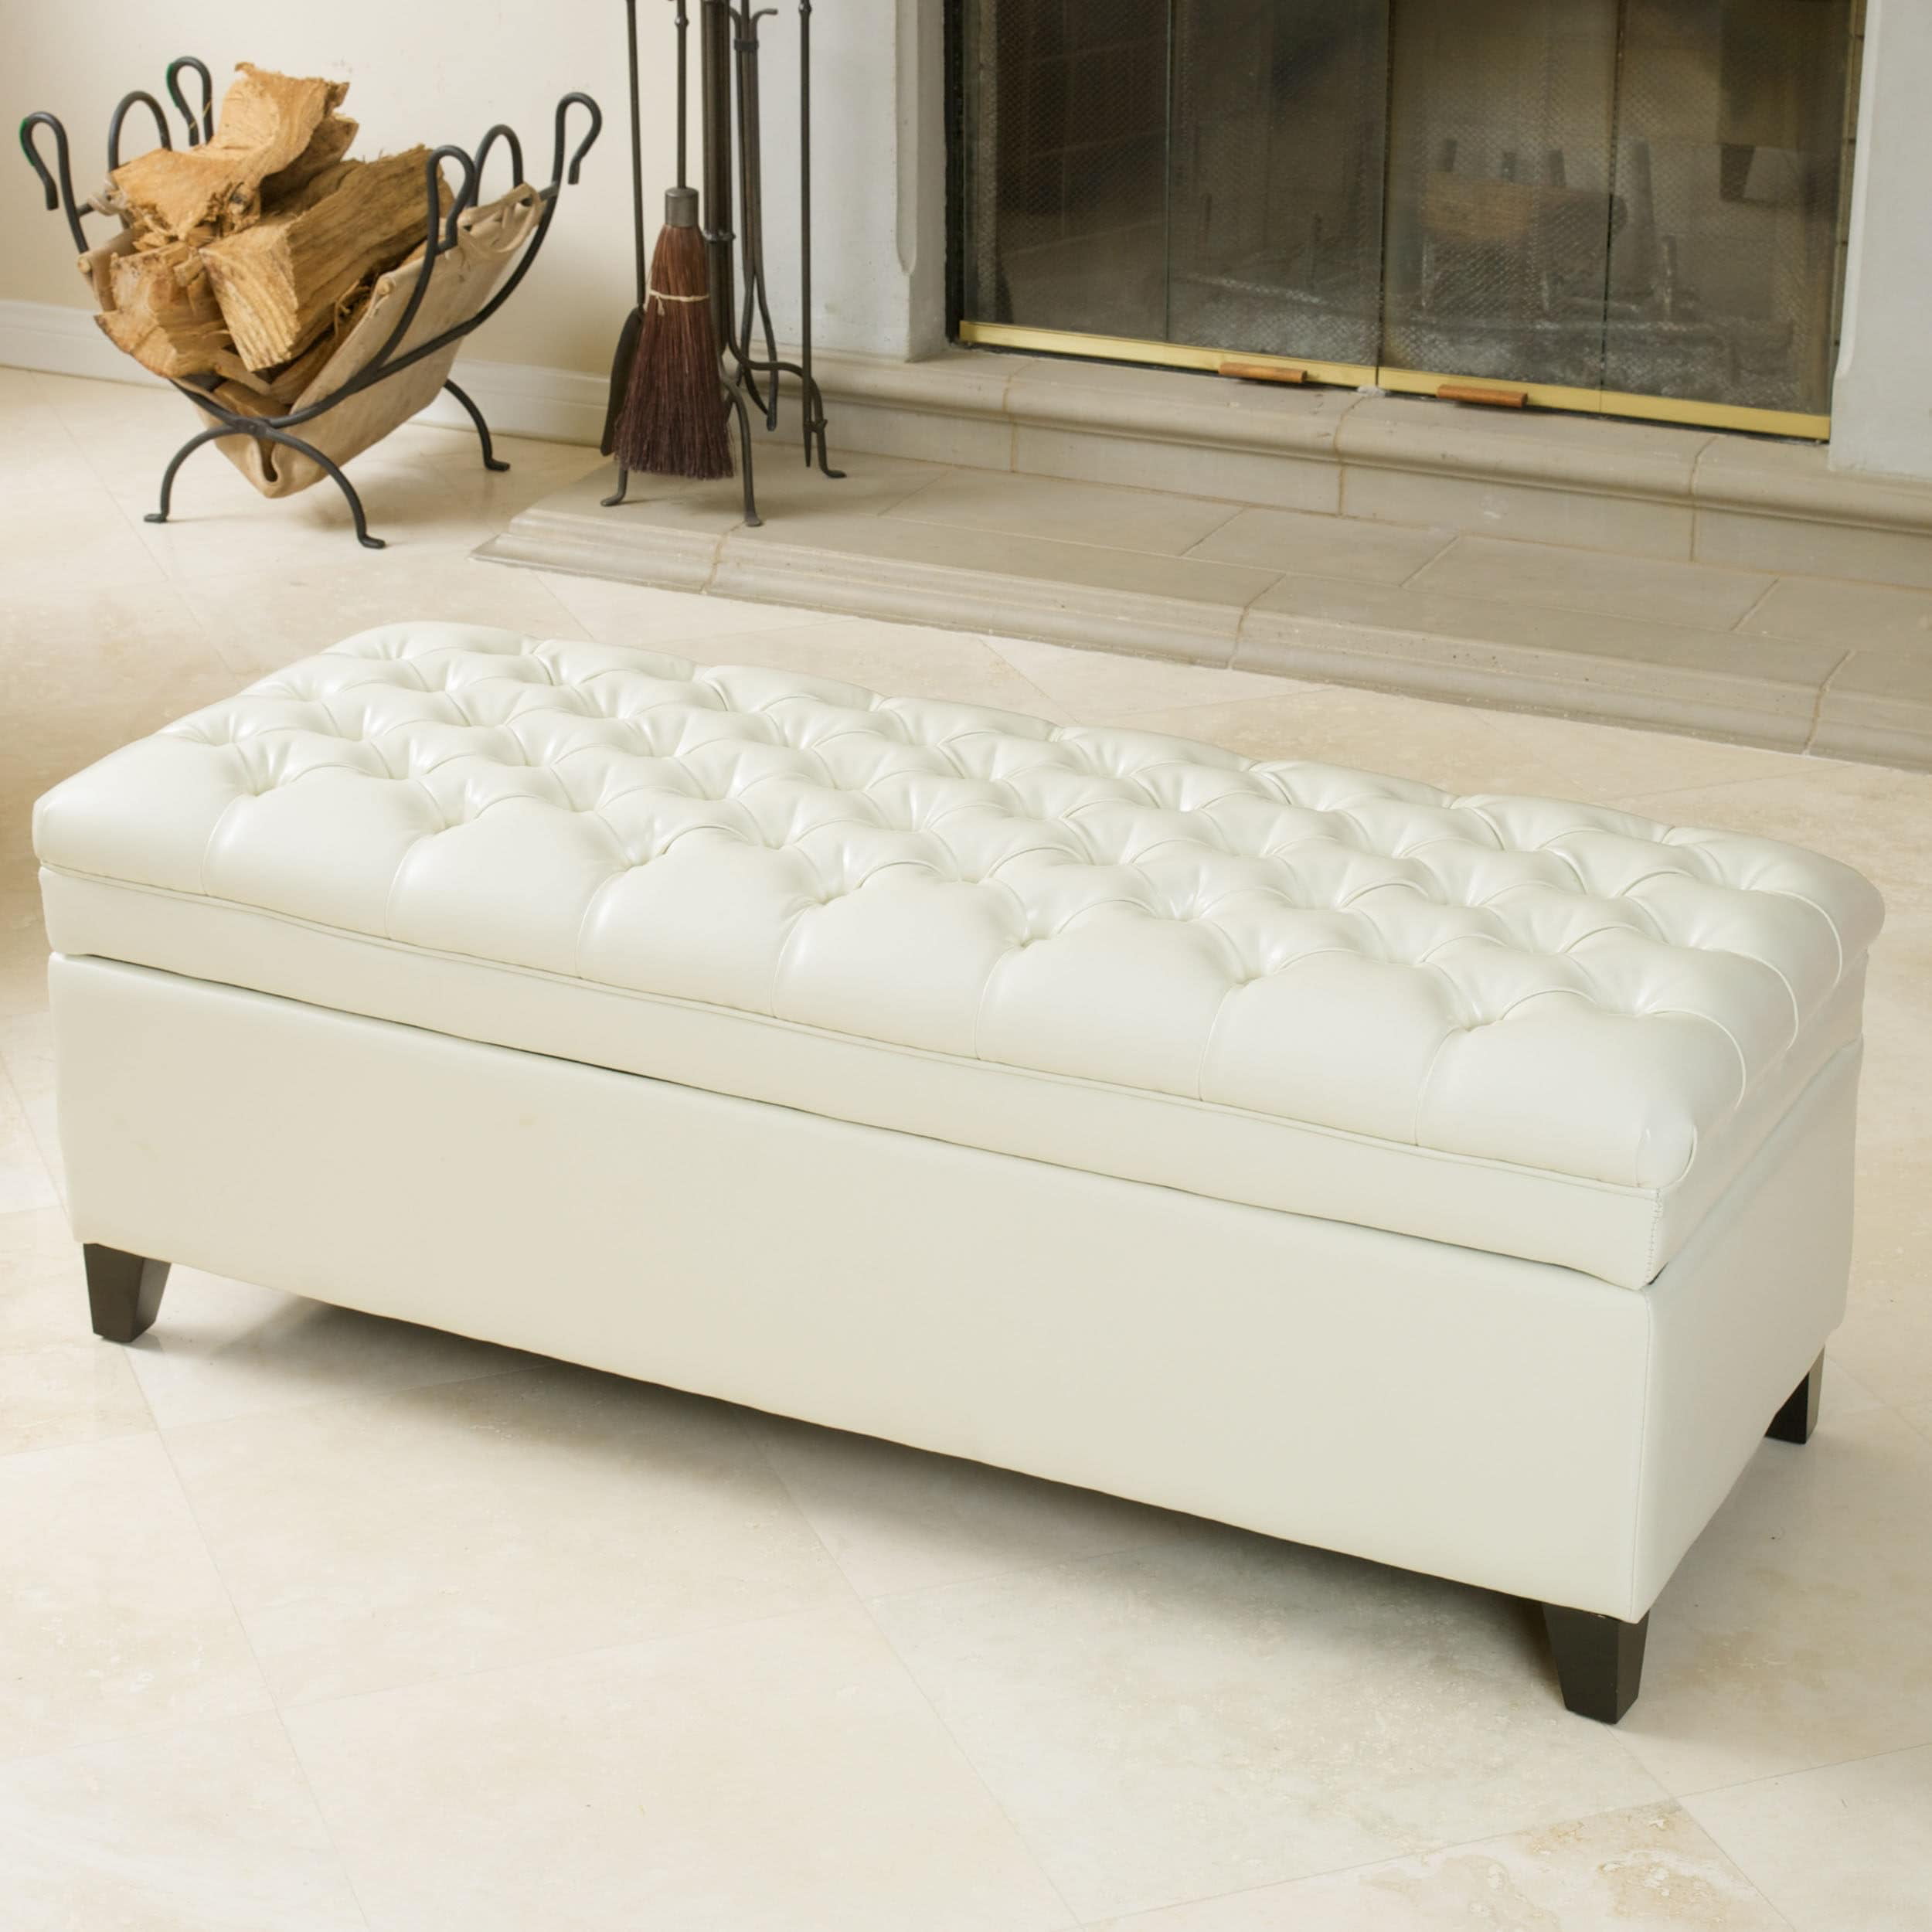 Christopher Knight Home Hastings Tufted, Ivory Leather Ottoman